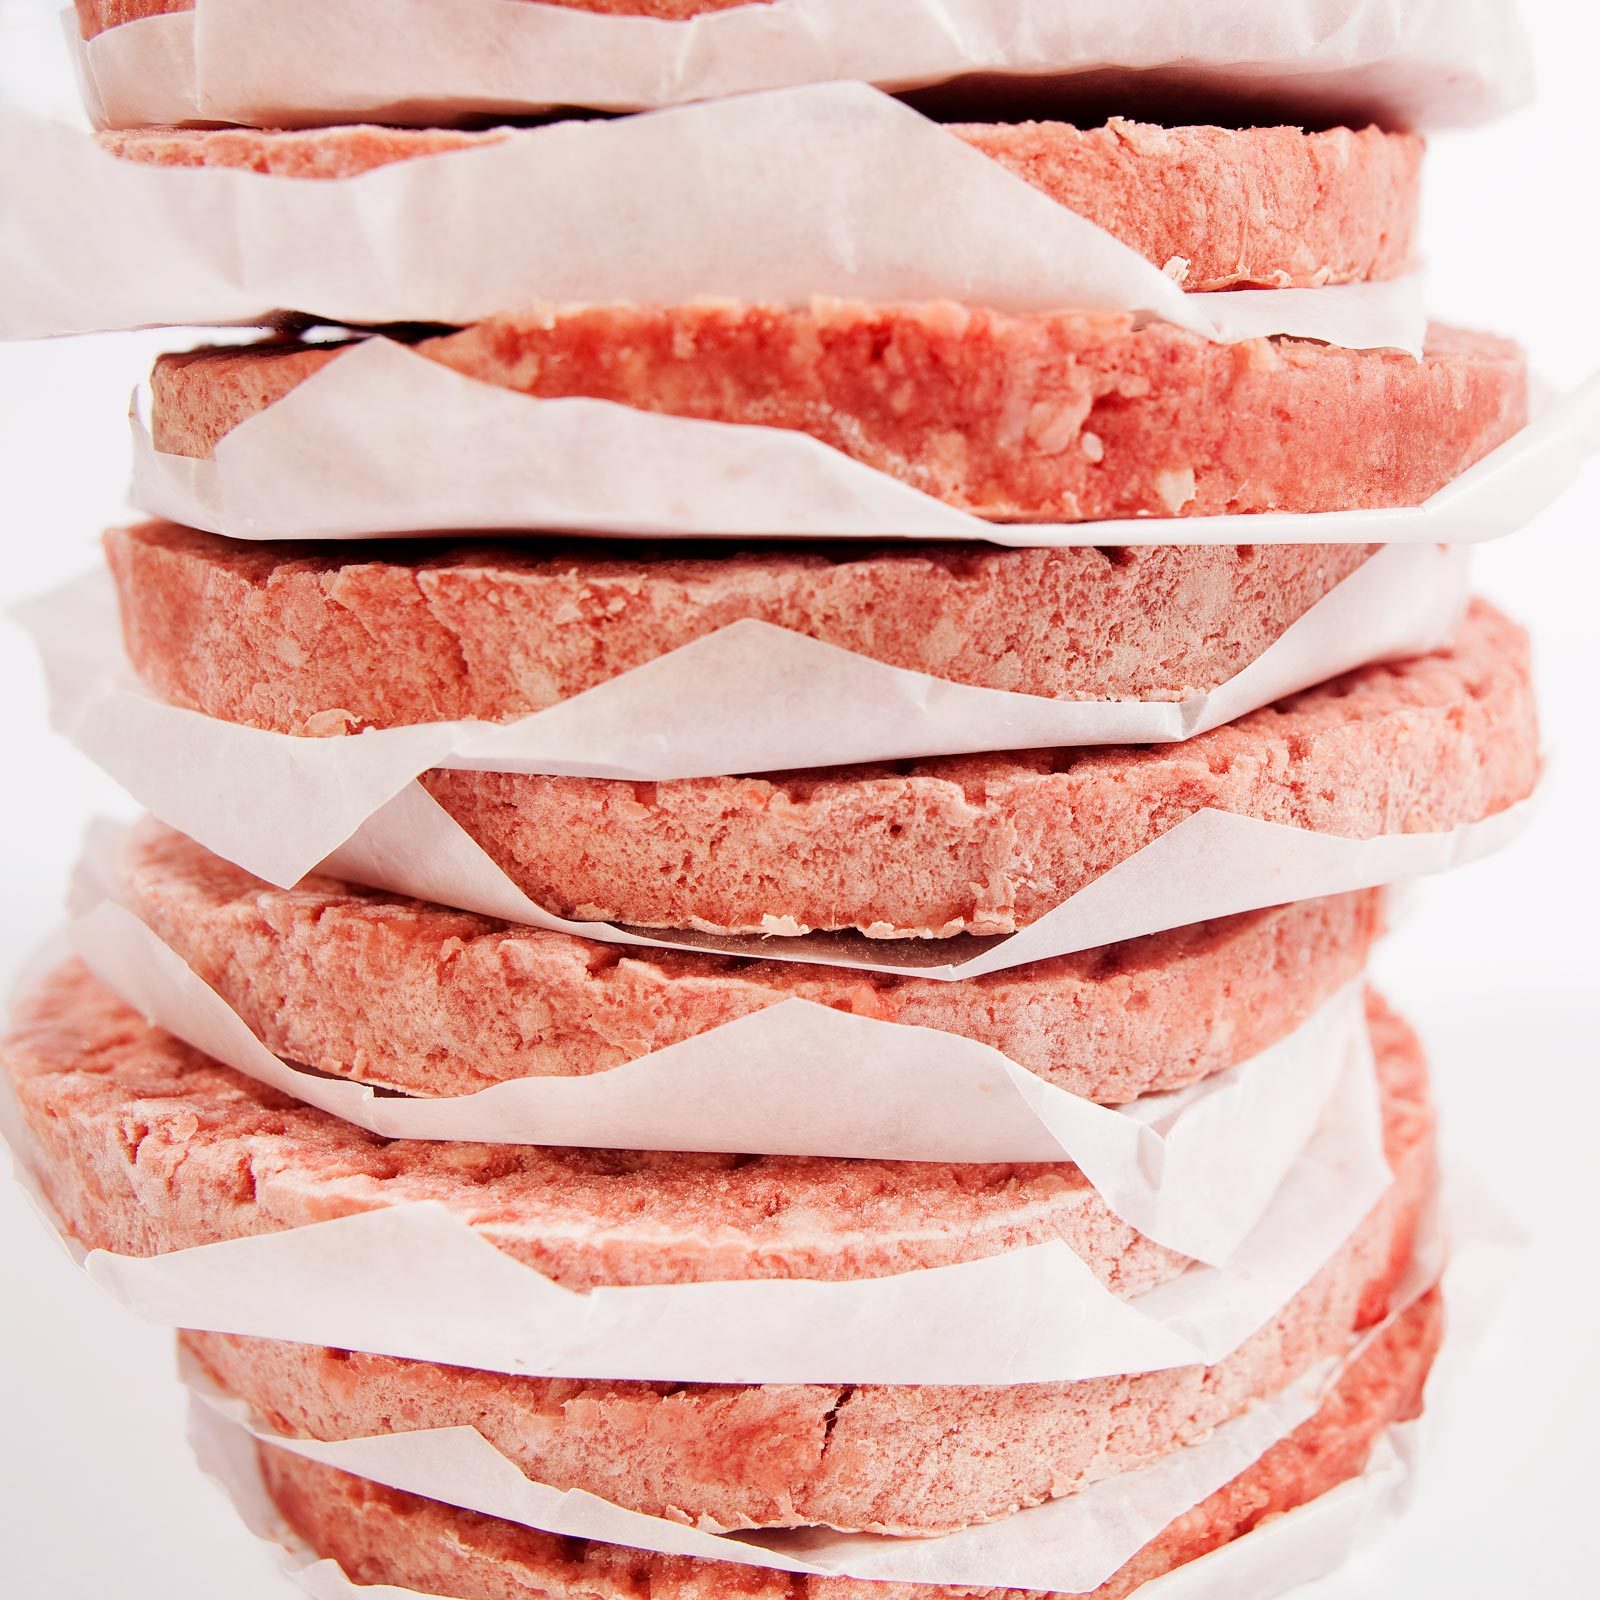 More Than 6,700 Pounds of Ground Beef Are Being Recalled in 4 States